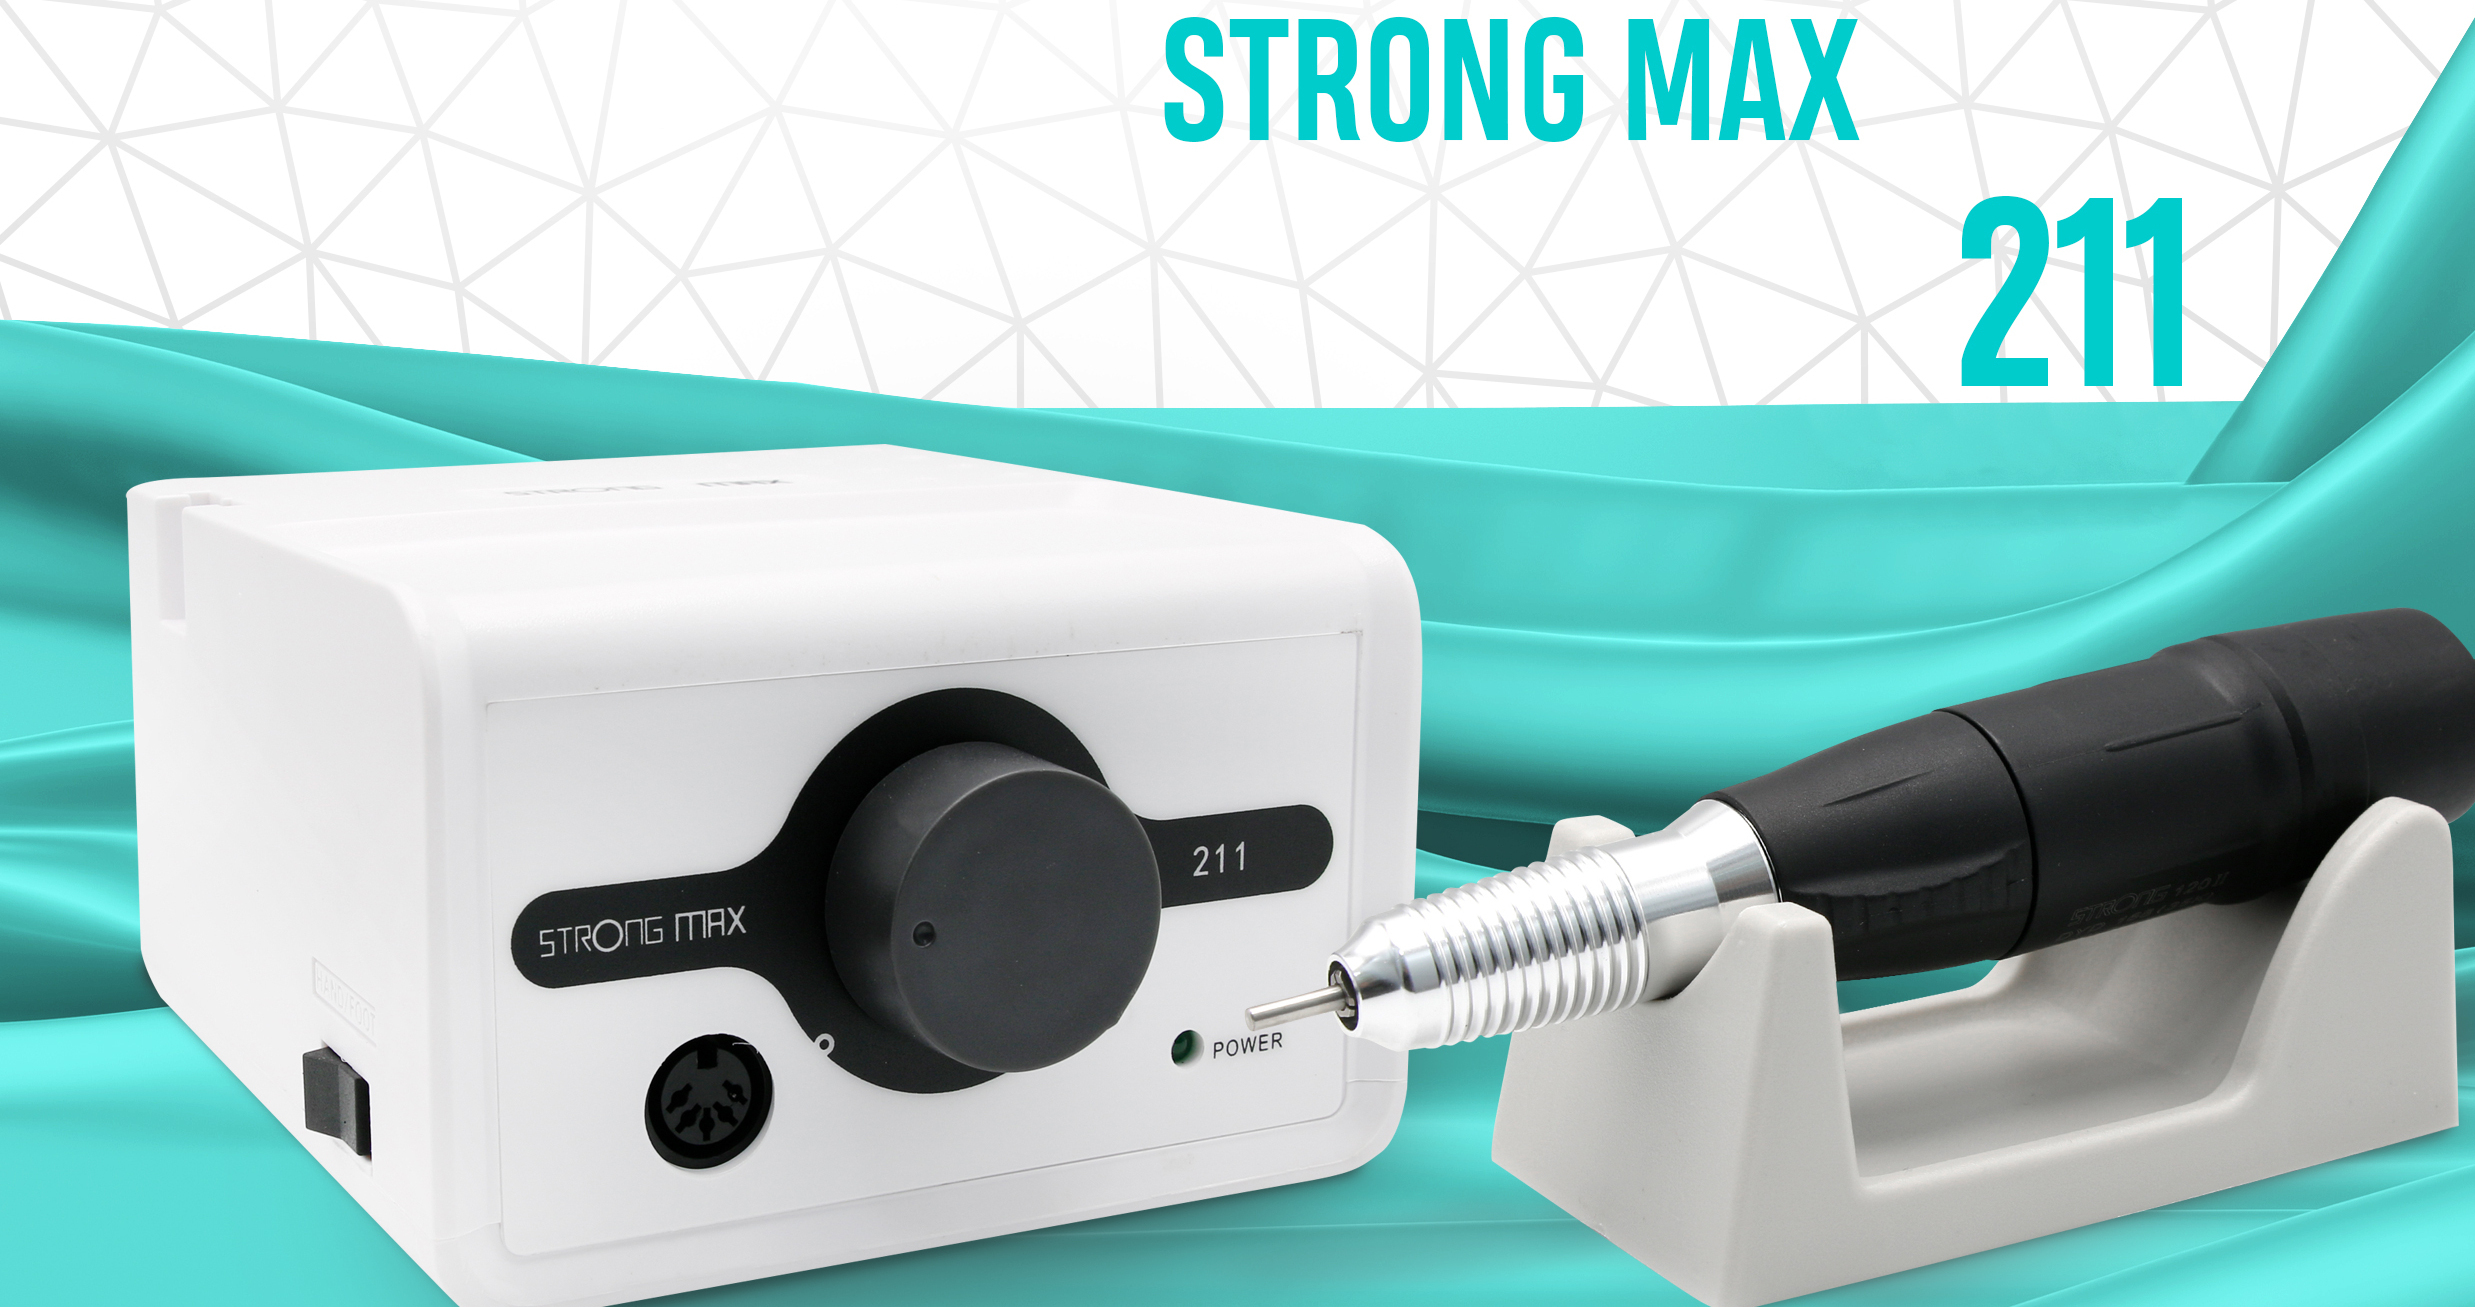 Strong Max 211 65W 35000 rpm professional manicure nail drill: the top choice of manicure craftsmen